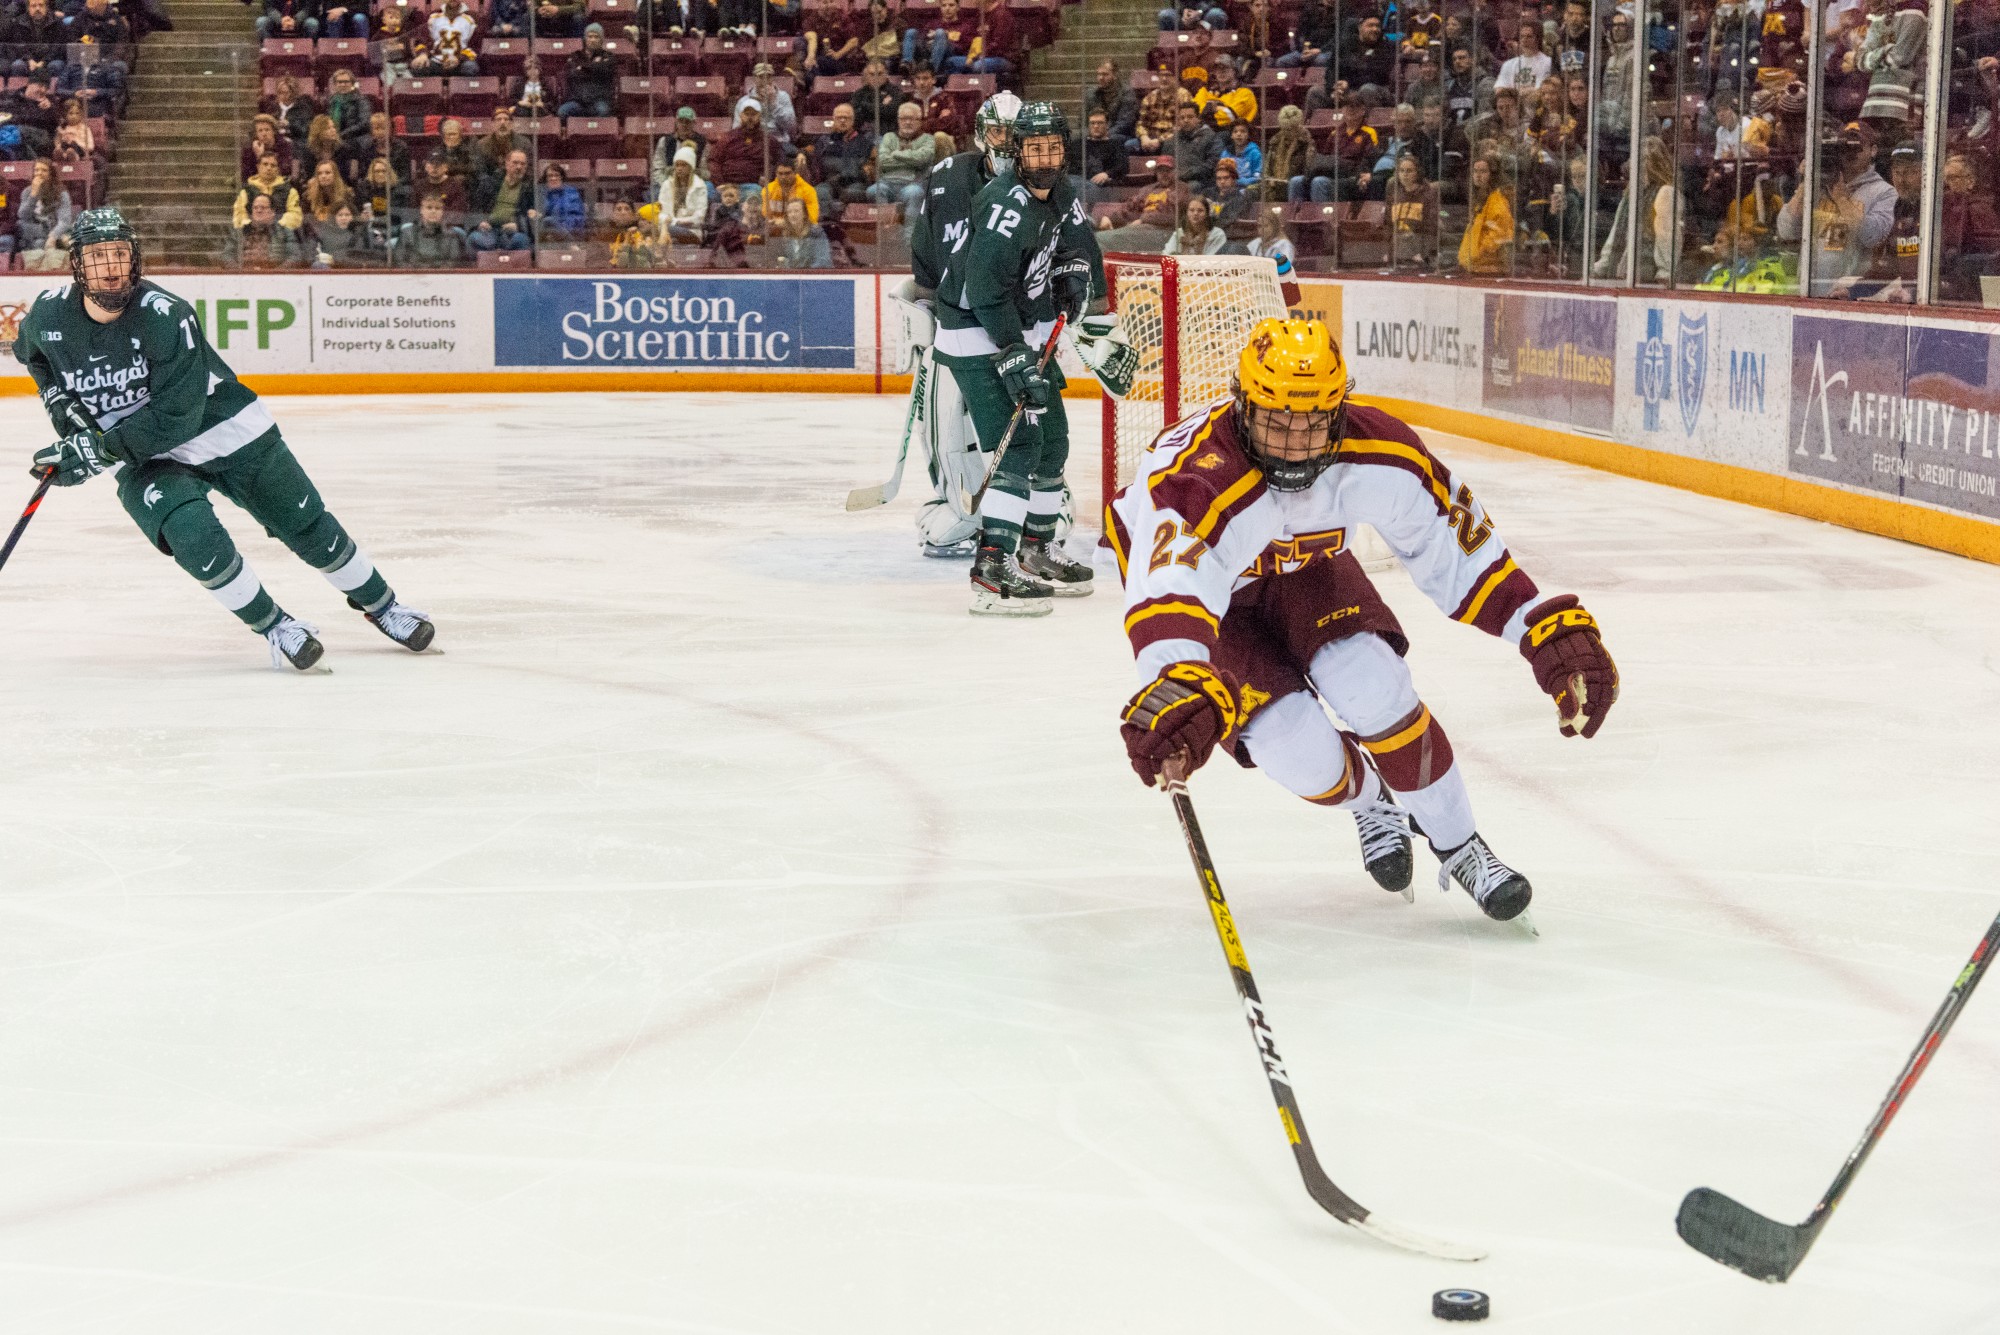 Gophers Forward Blake McLaughlin rushes to take the puck from a defender at the 3M Arena at Marriucci on Friday, Feb. 7. Gophers won against Michigan State 4-1.